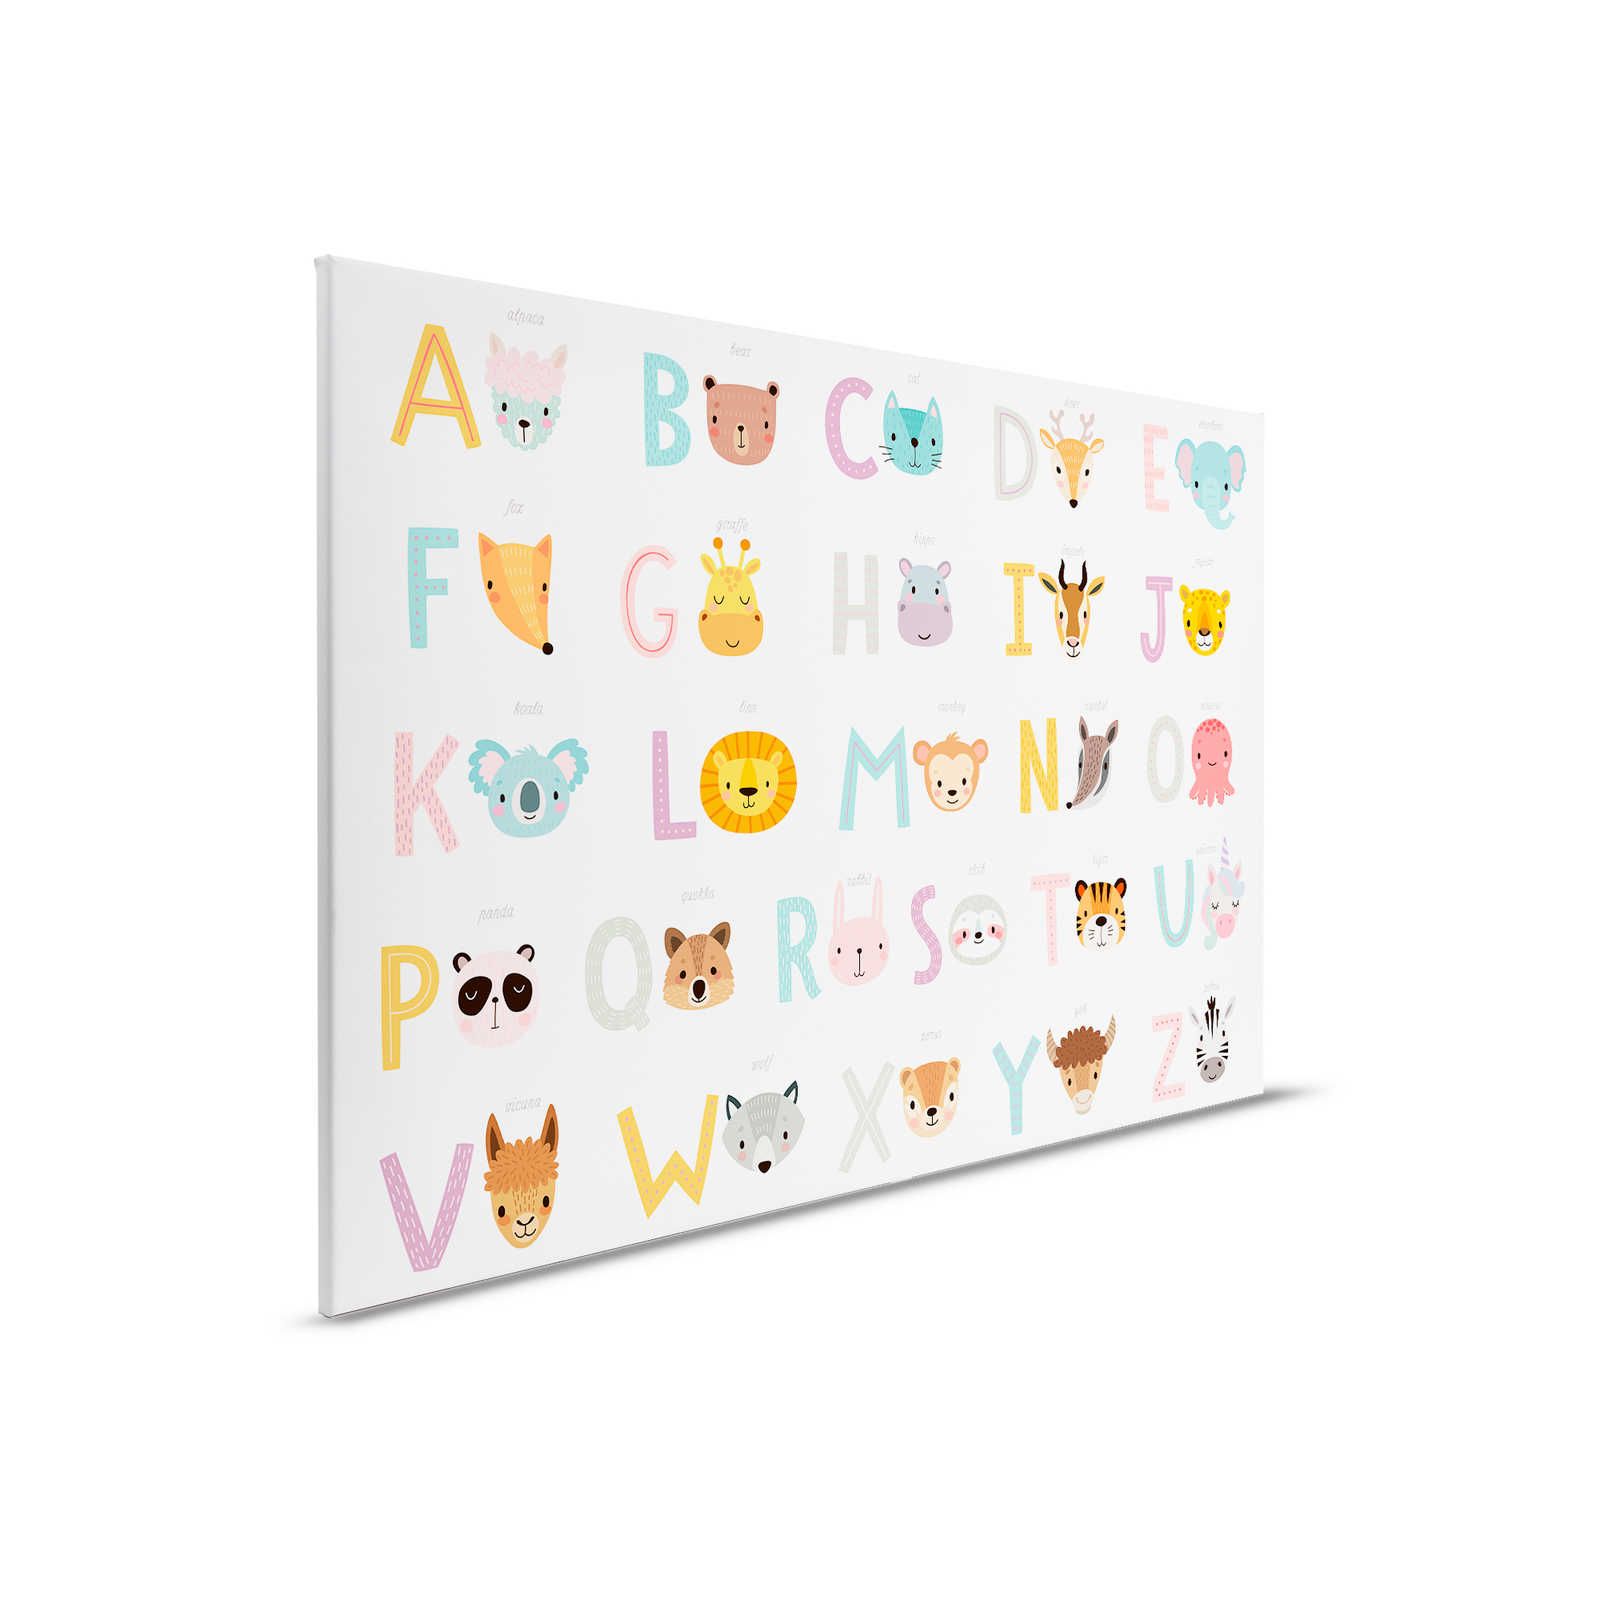         Canvas ABC with animals and animal names - 90 cm x 60 cm
    